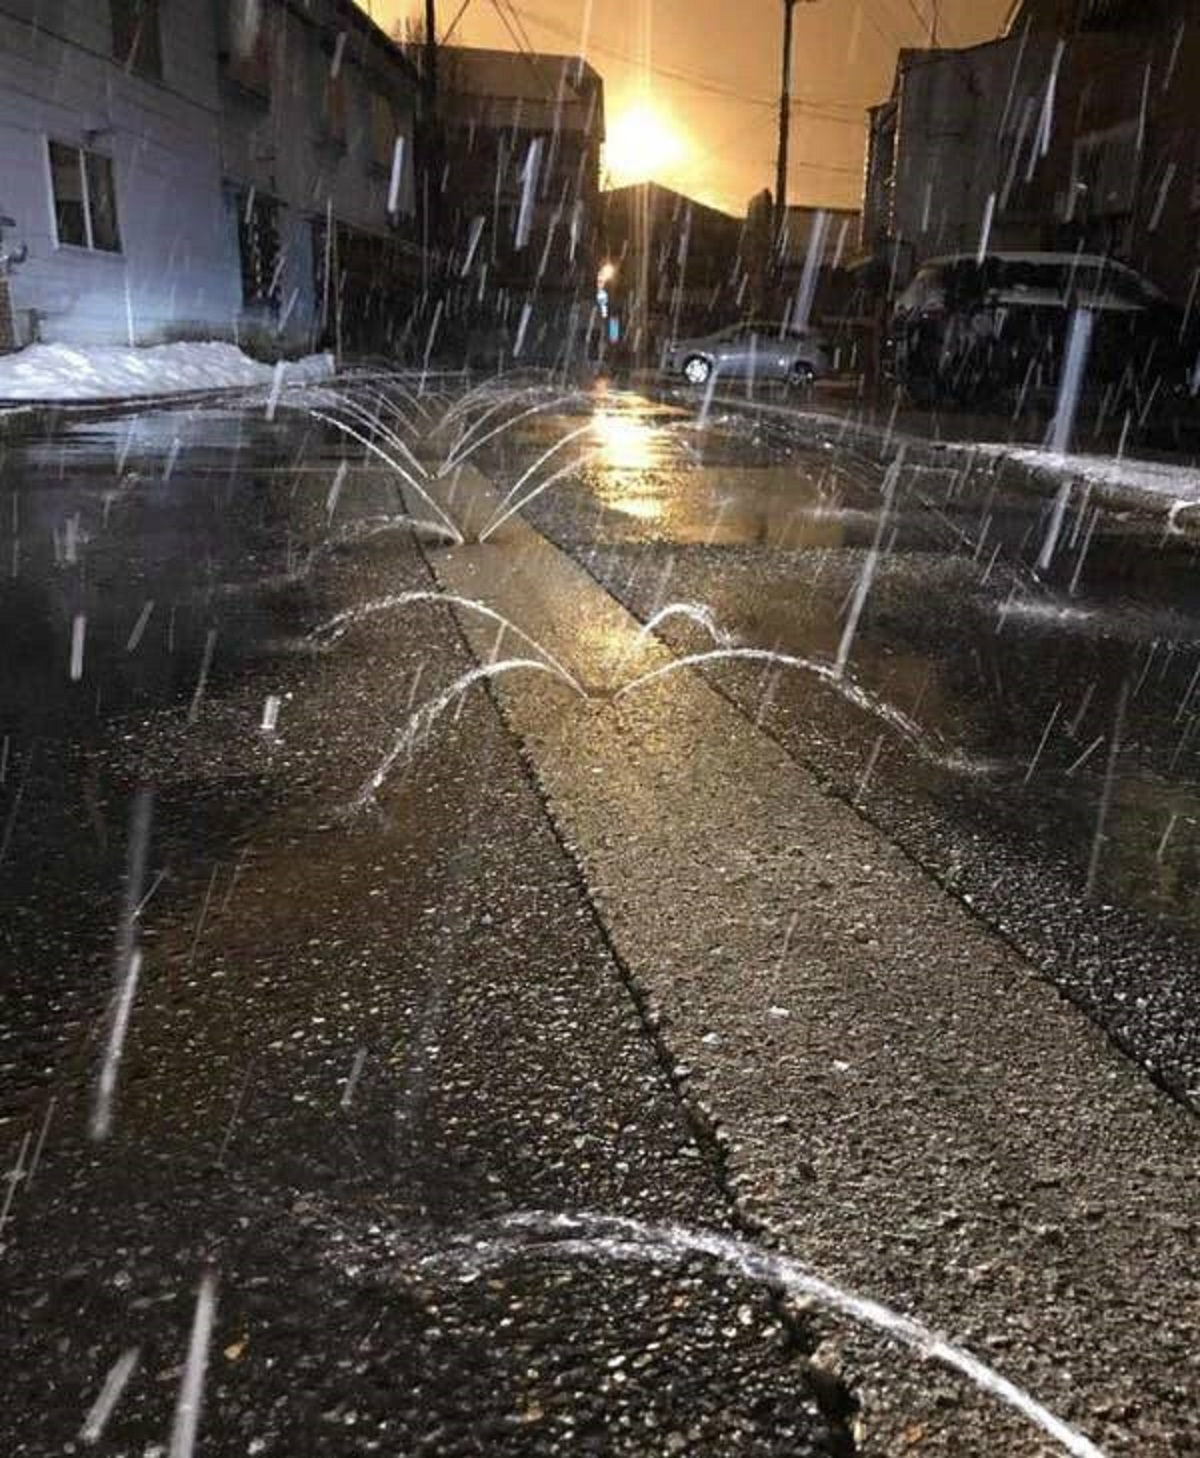 There's a ski resort in Japan that uses saltwater sprinklers to keep pavement from getting too icy and dangerous.